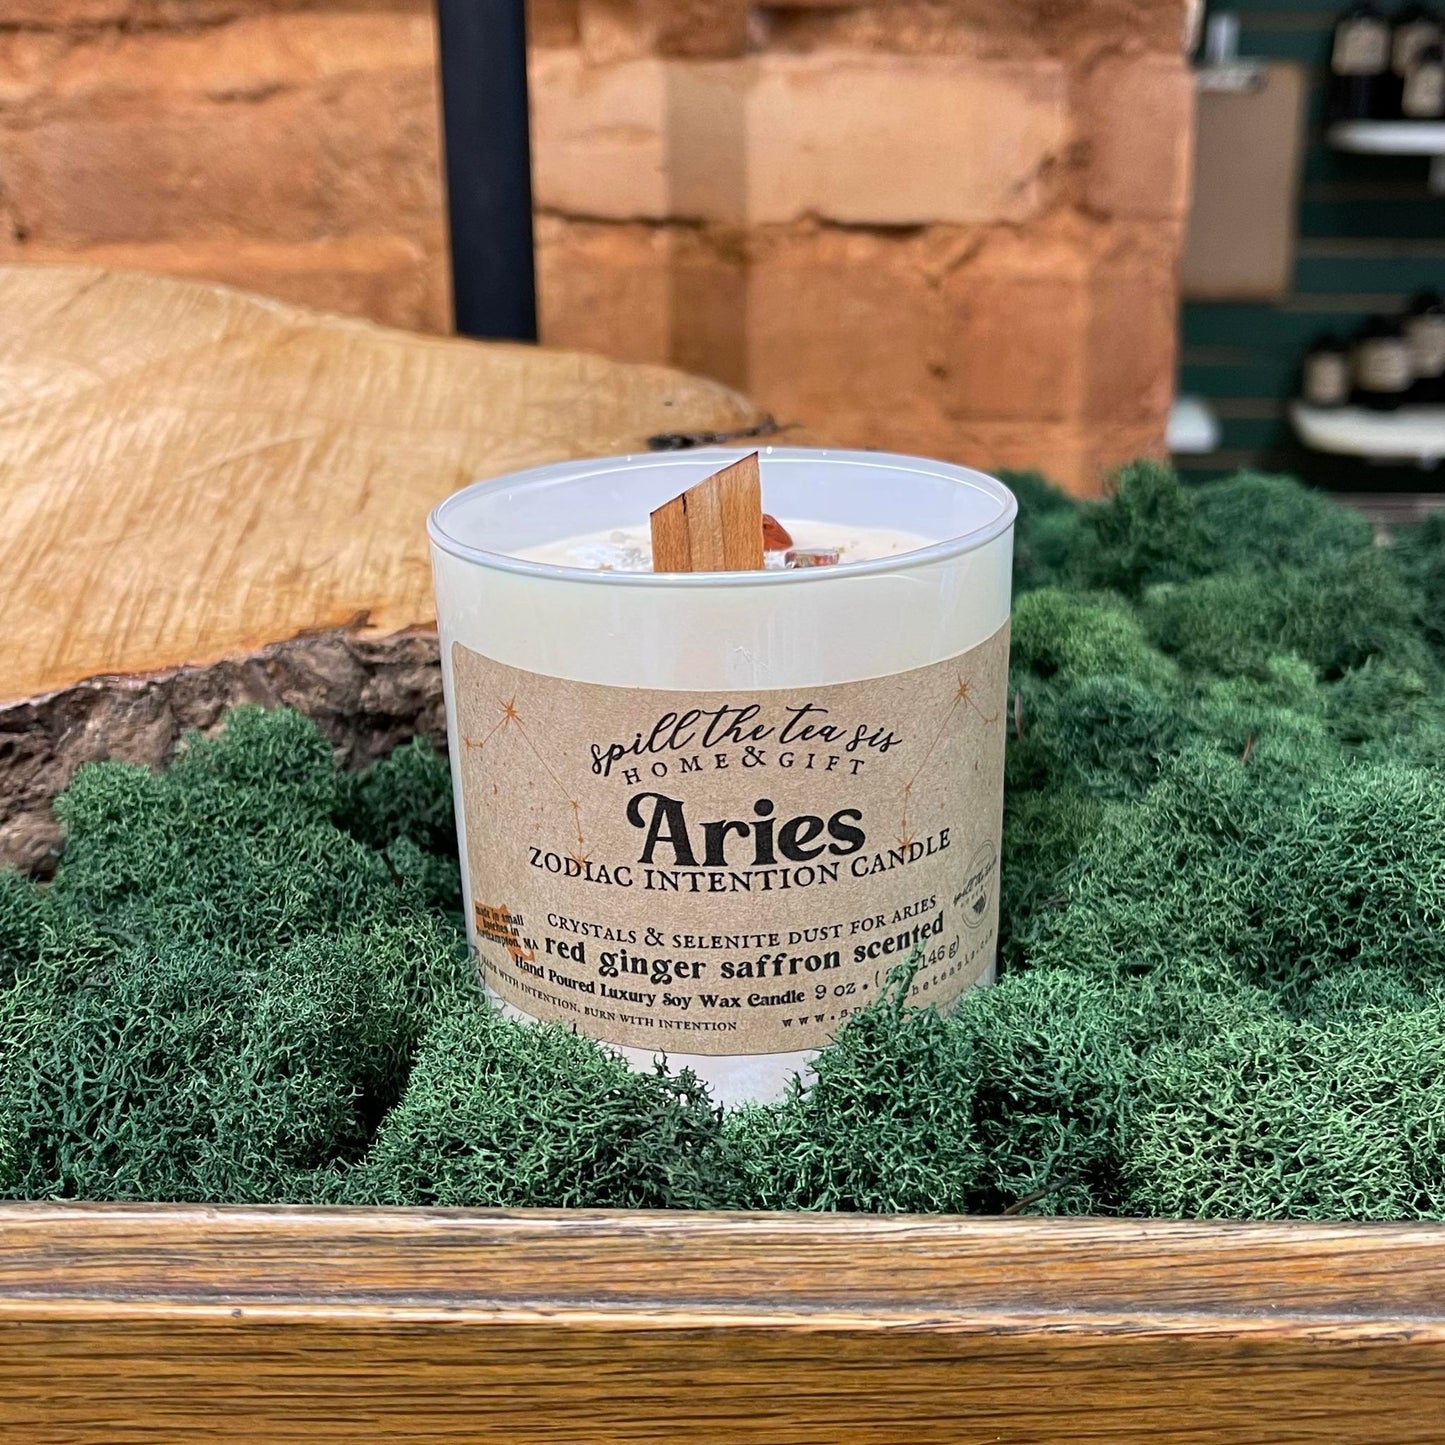 Aries Zodiac Intention Soy Wax Candle - 9oz